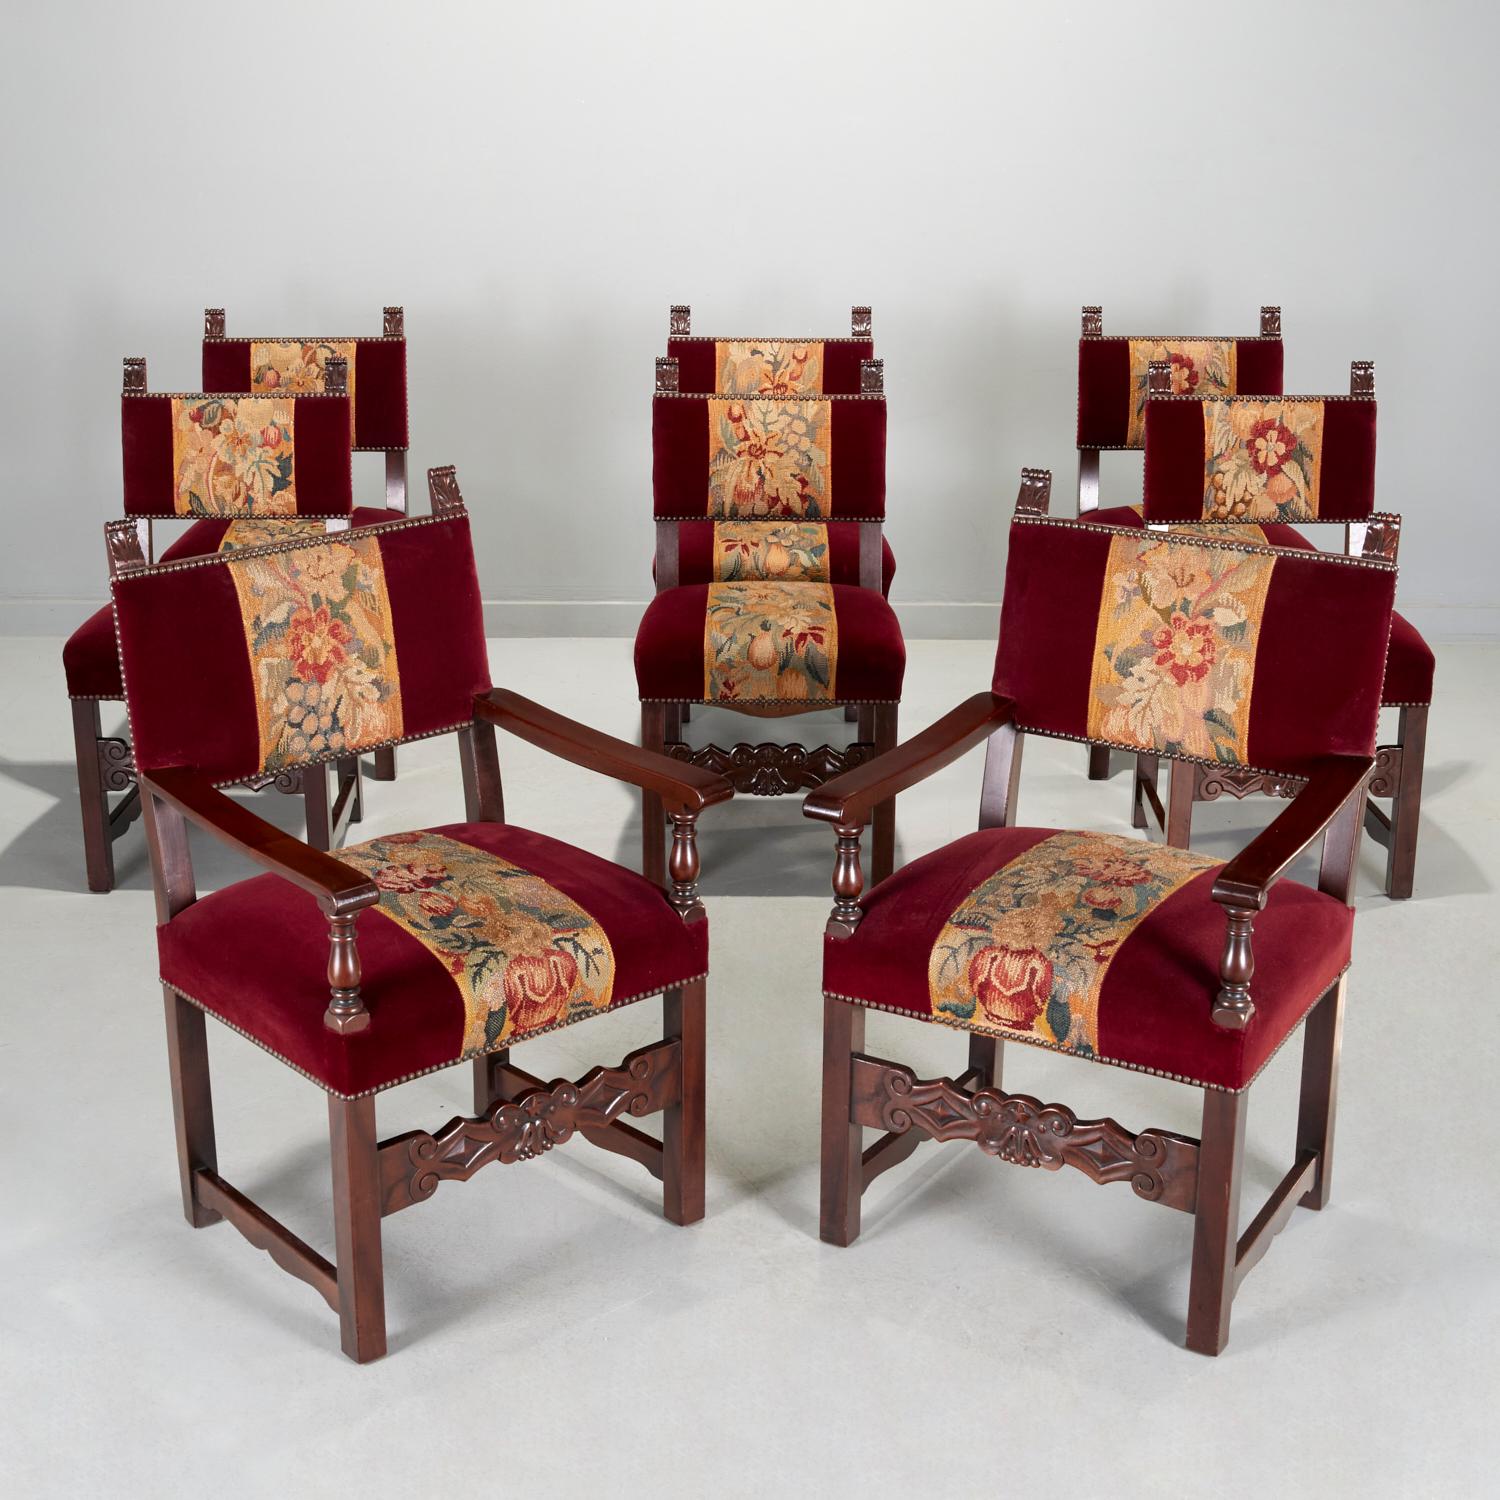 Italian Baroque Style Schmieg-Hungate & Kotzian LLC., Dining Chairs, Set of 8 For Sale 2